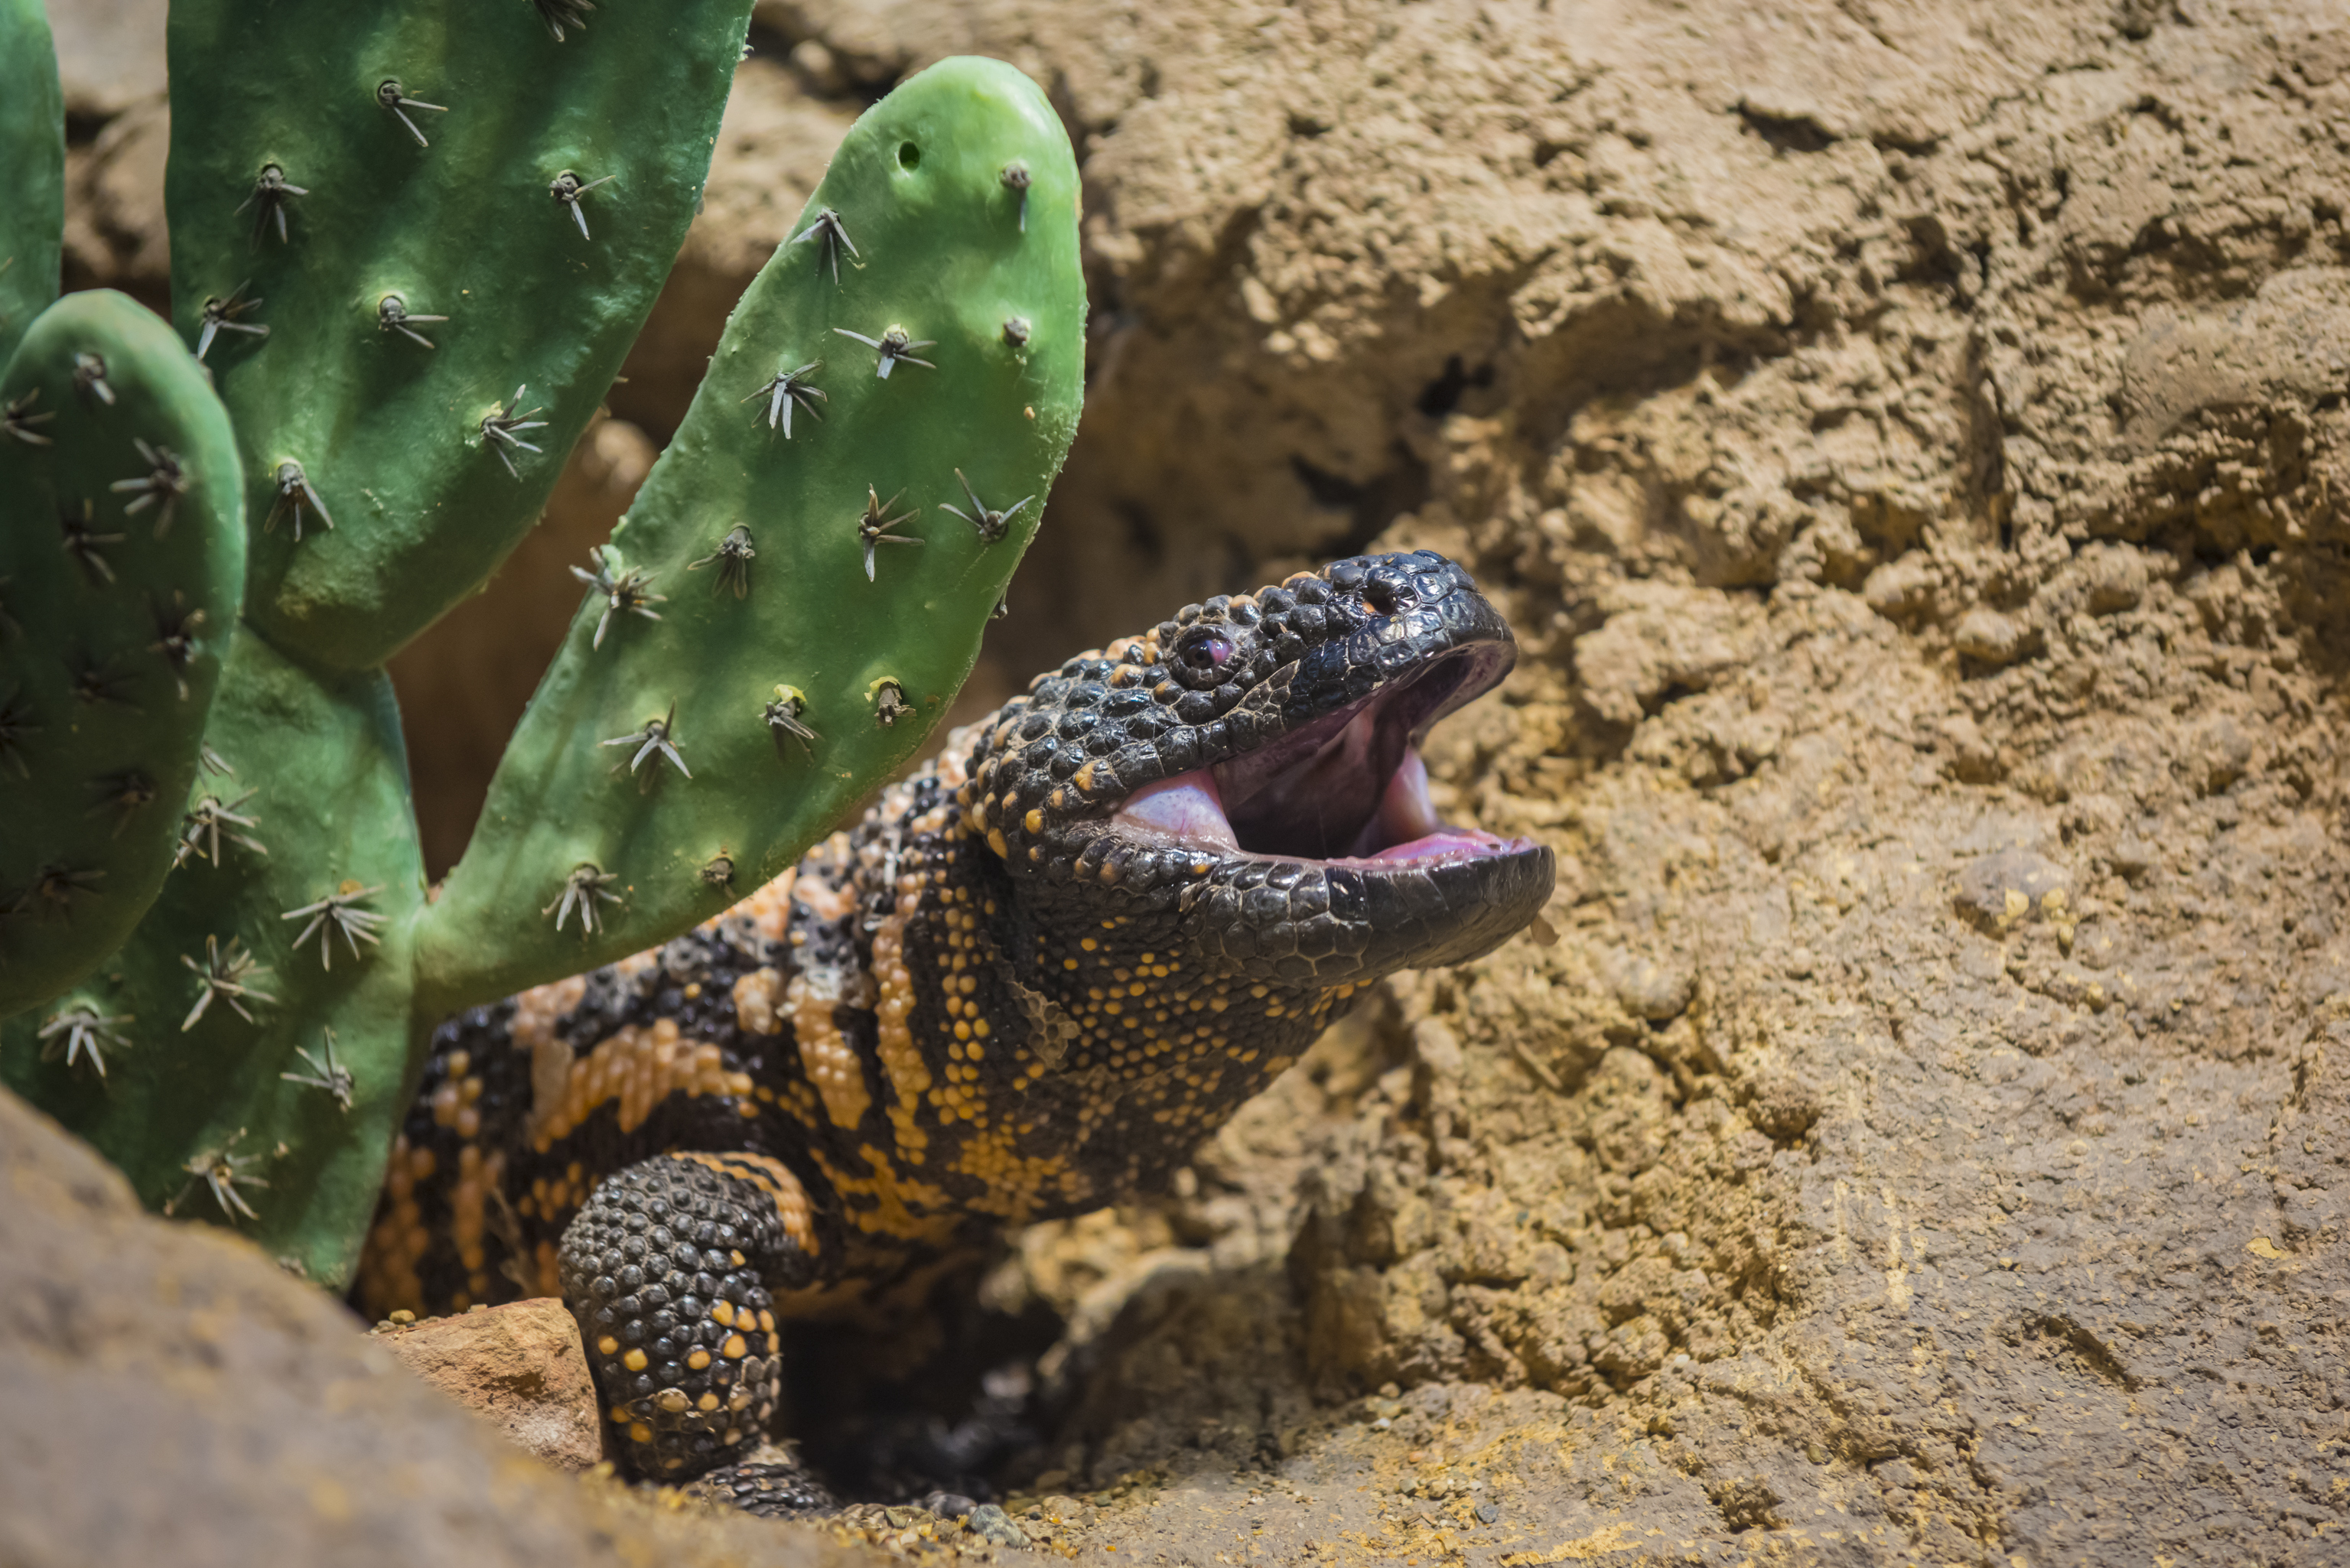 The Venomous Gila Monster Isn’t As Scary As You Might Think 